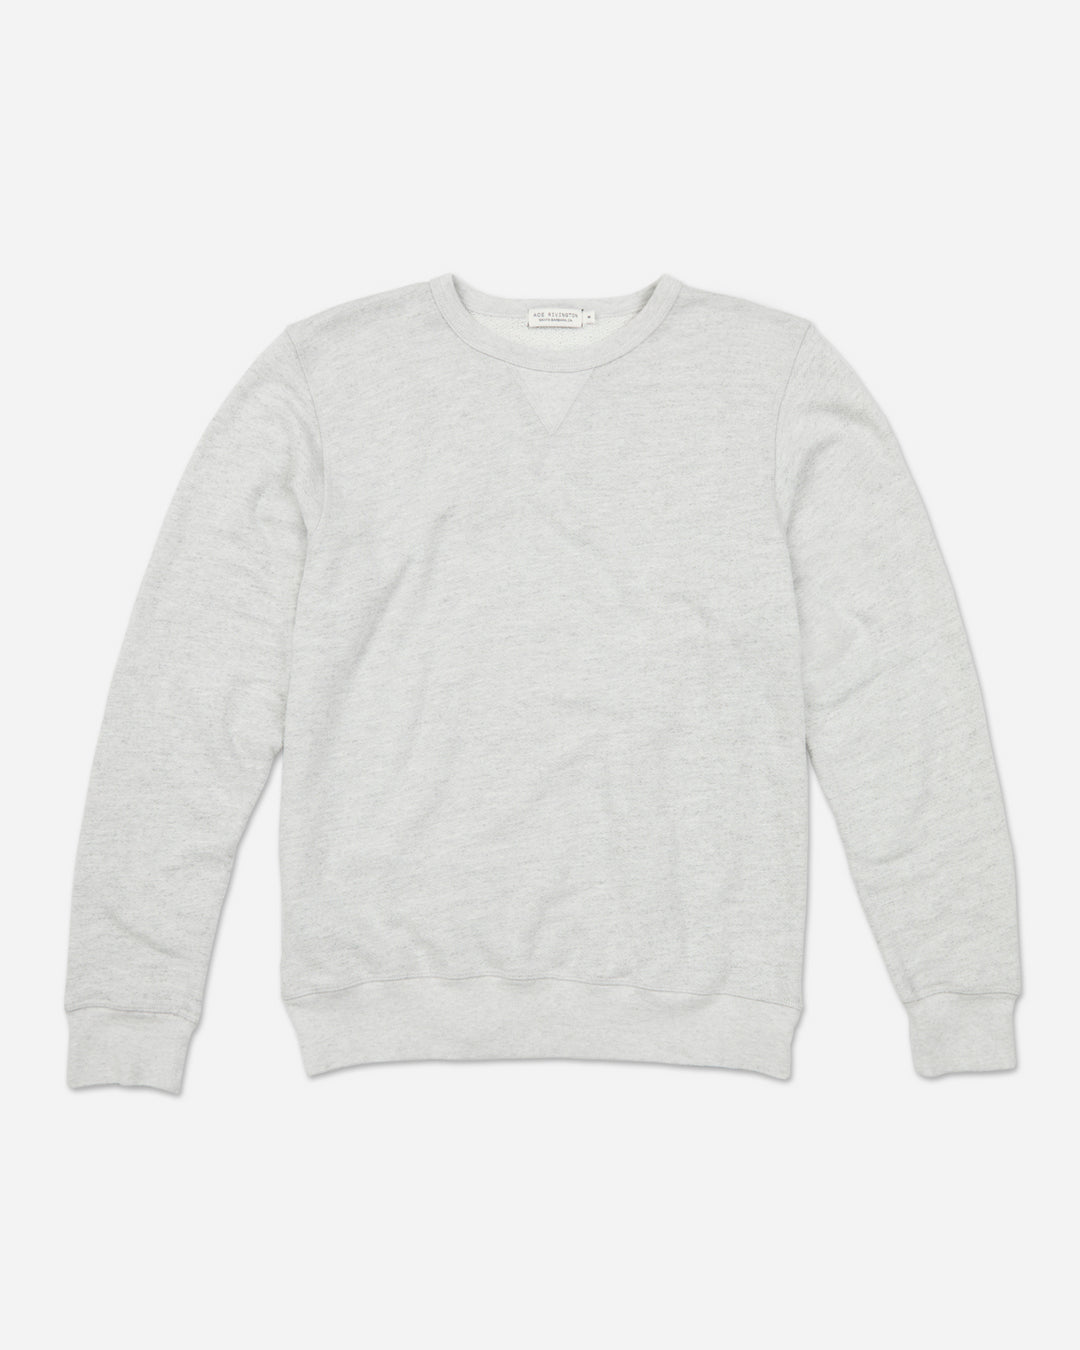 front of fully extended off white grey homespun french terry crew neck sweatshirt with white accent stitching